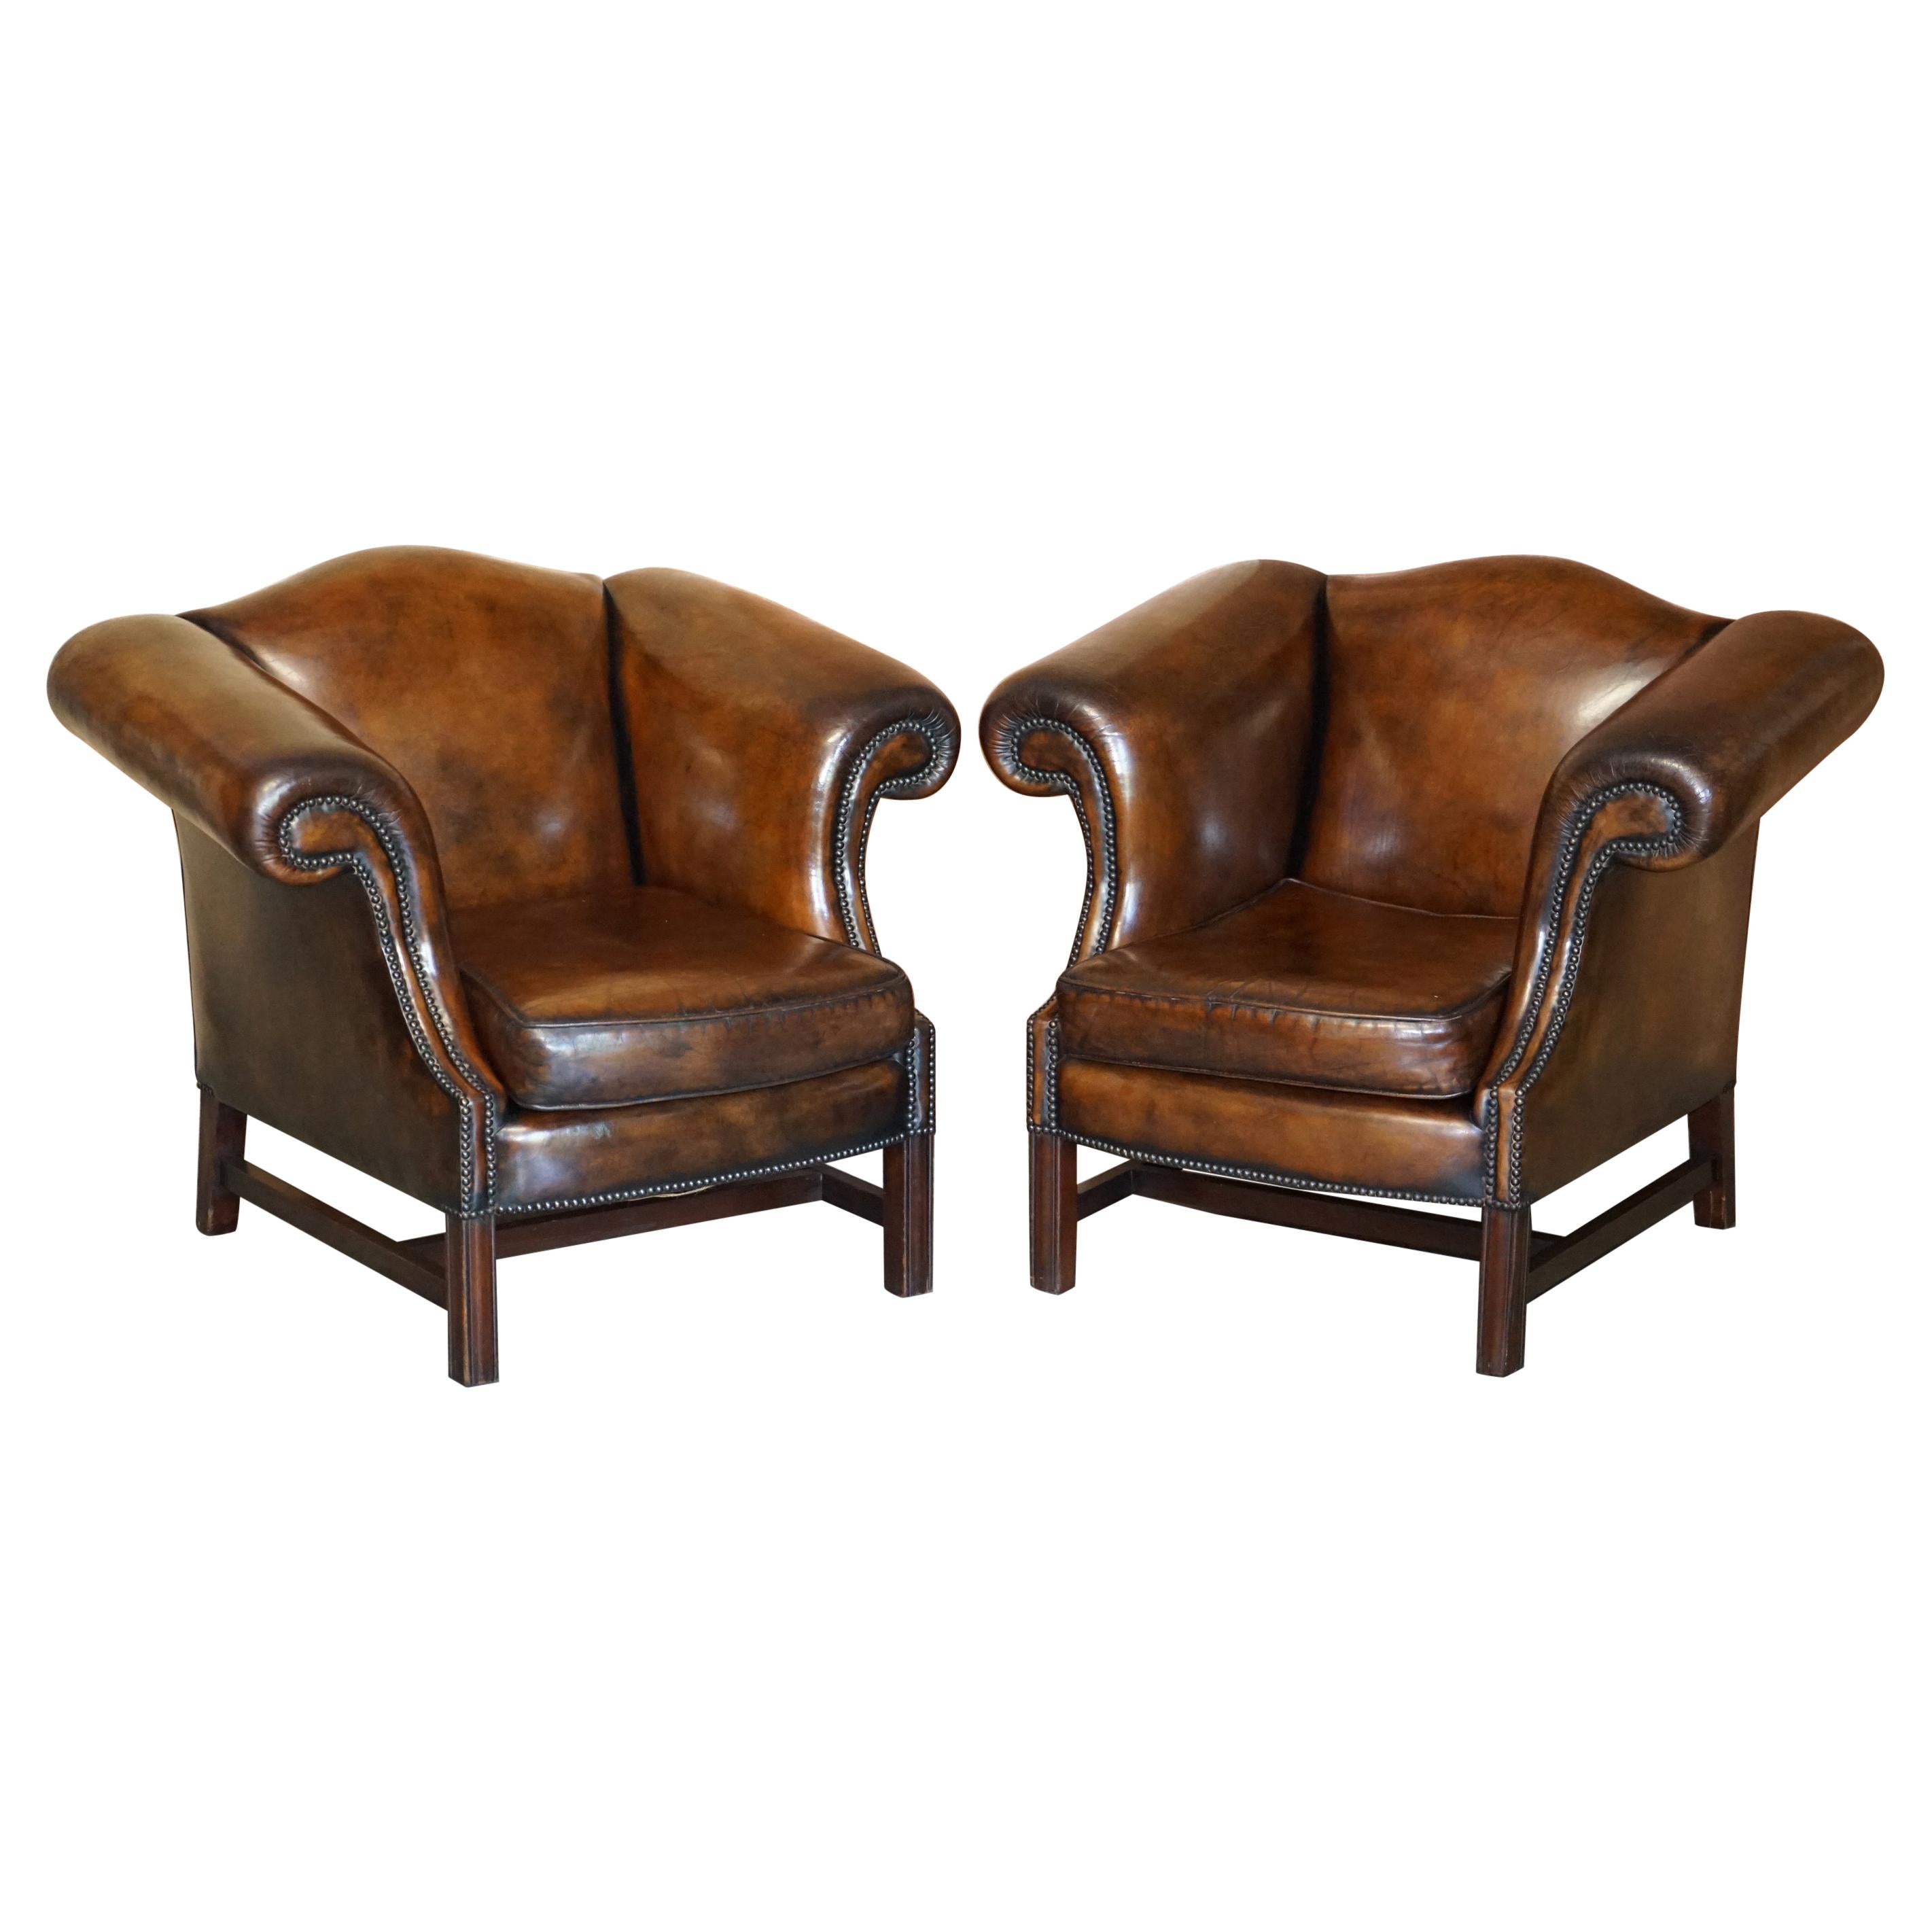 Part of Large Suite This Lovely Pair of Hand Dyed Brown Leather Club Armchairs